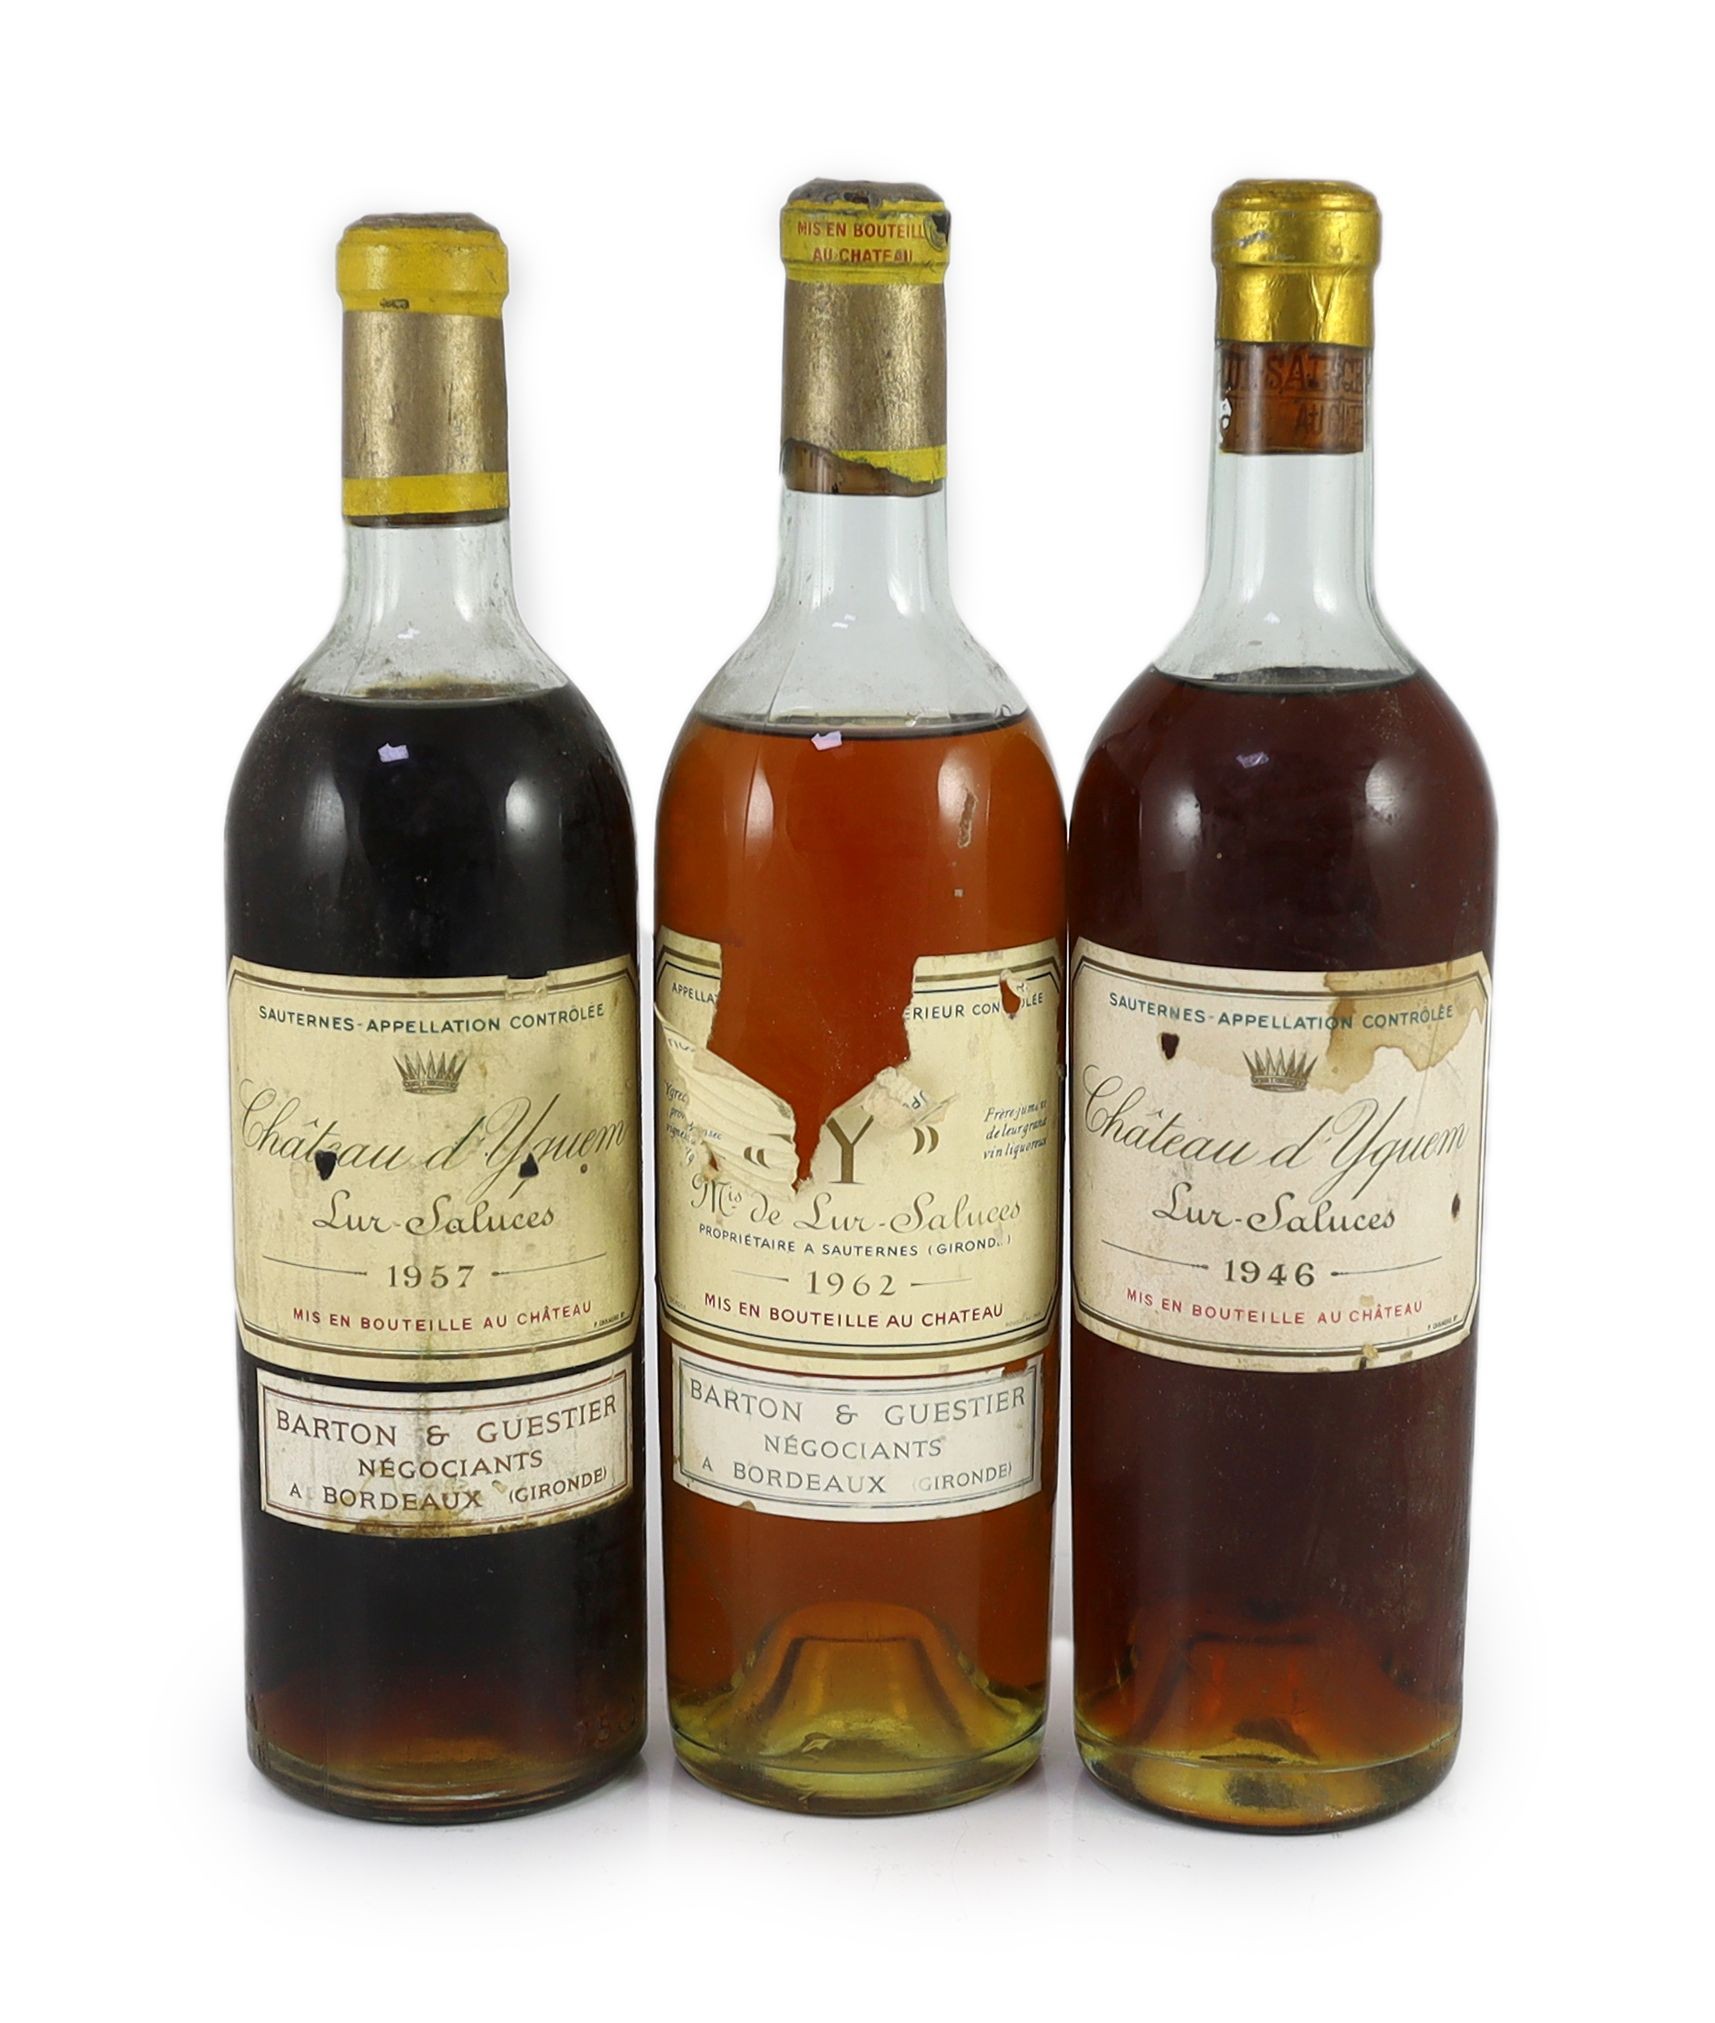 Three bottle of Chateau d'Yquem Lur-Saluces 1946, 1957 and 1962